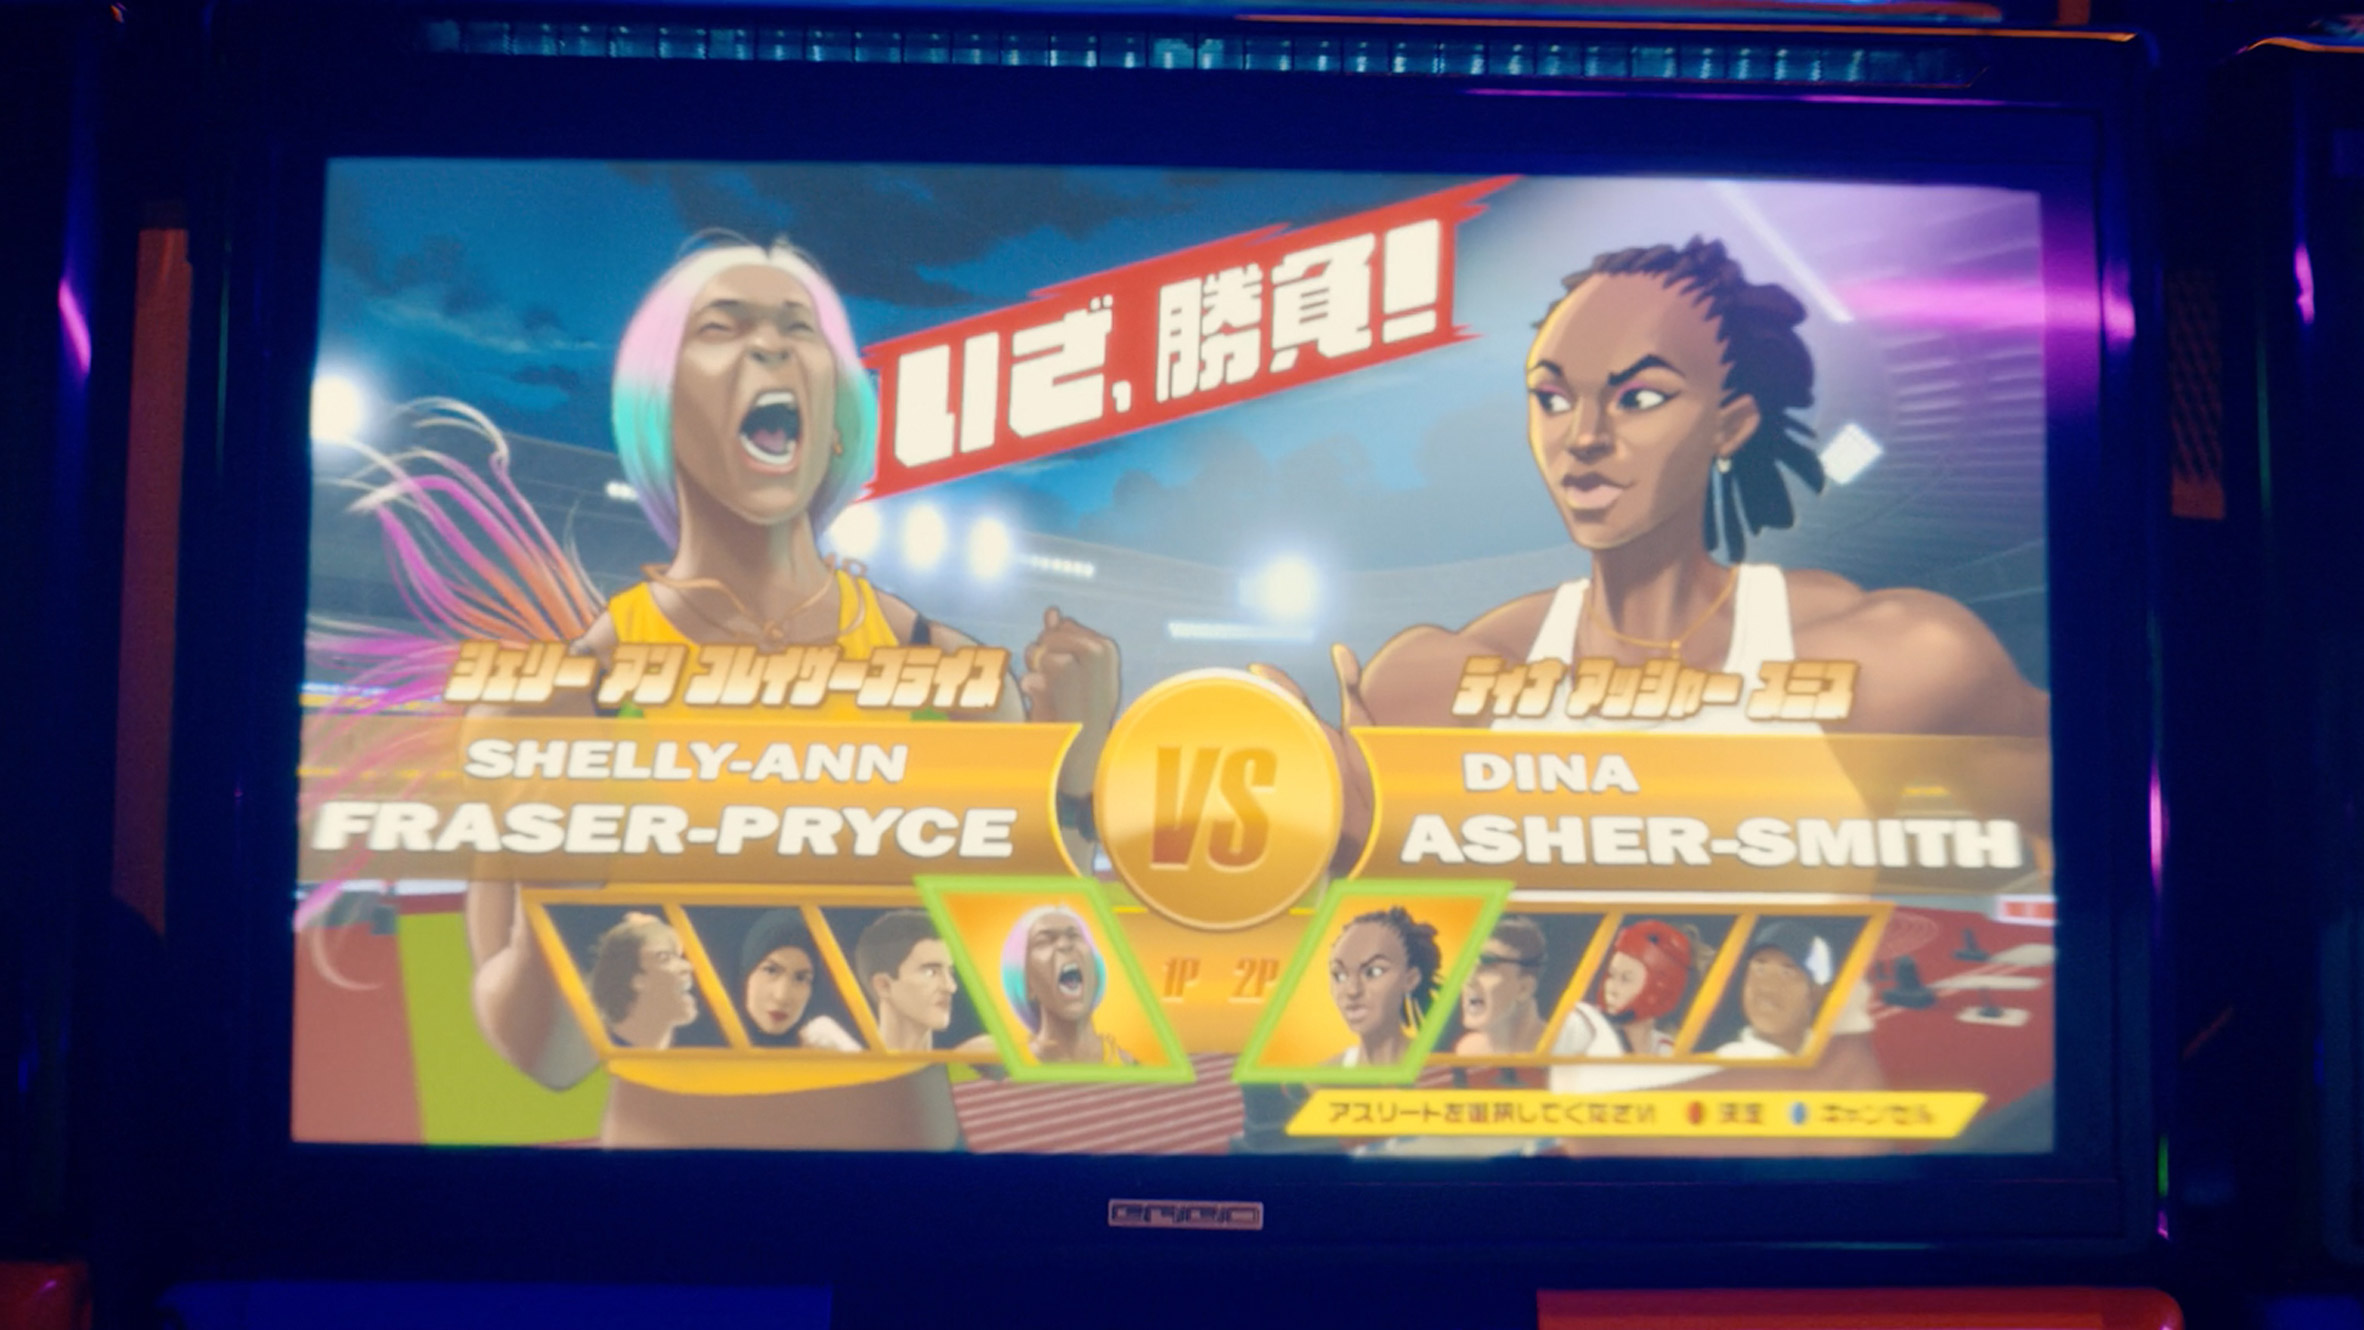 Video arcade scene with Street Fighter-style game including Dina Asher-Smith and Shelly-Ann Fraser-Pryce in BBC trailer for Tokyo 2020 Olympics produced by Factory Fifteen and Nexus Studios